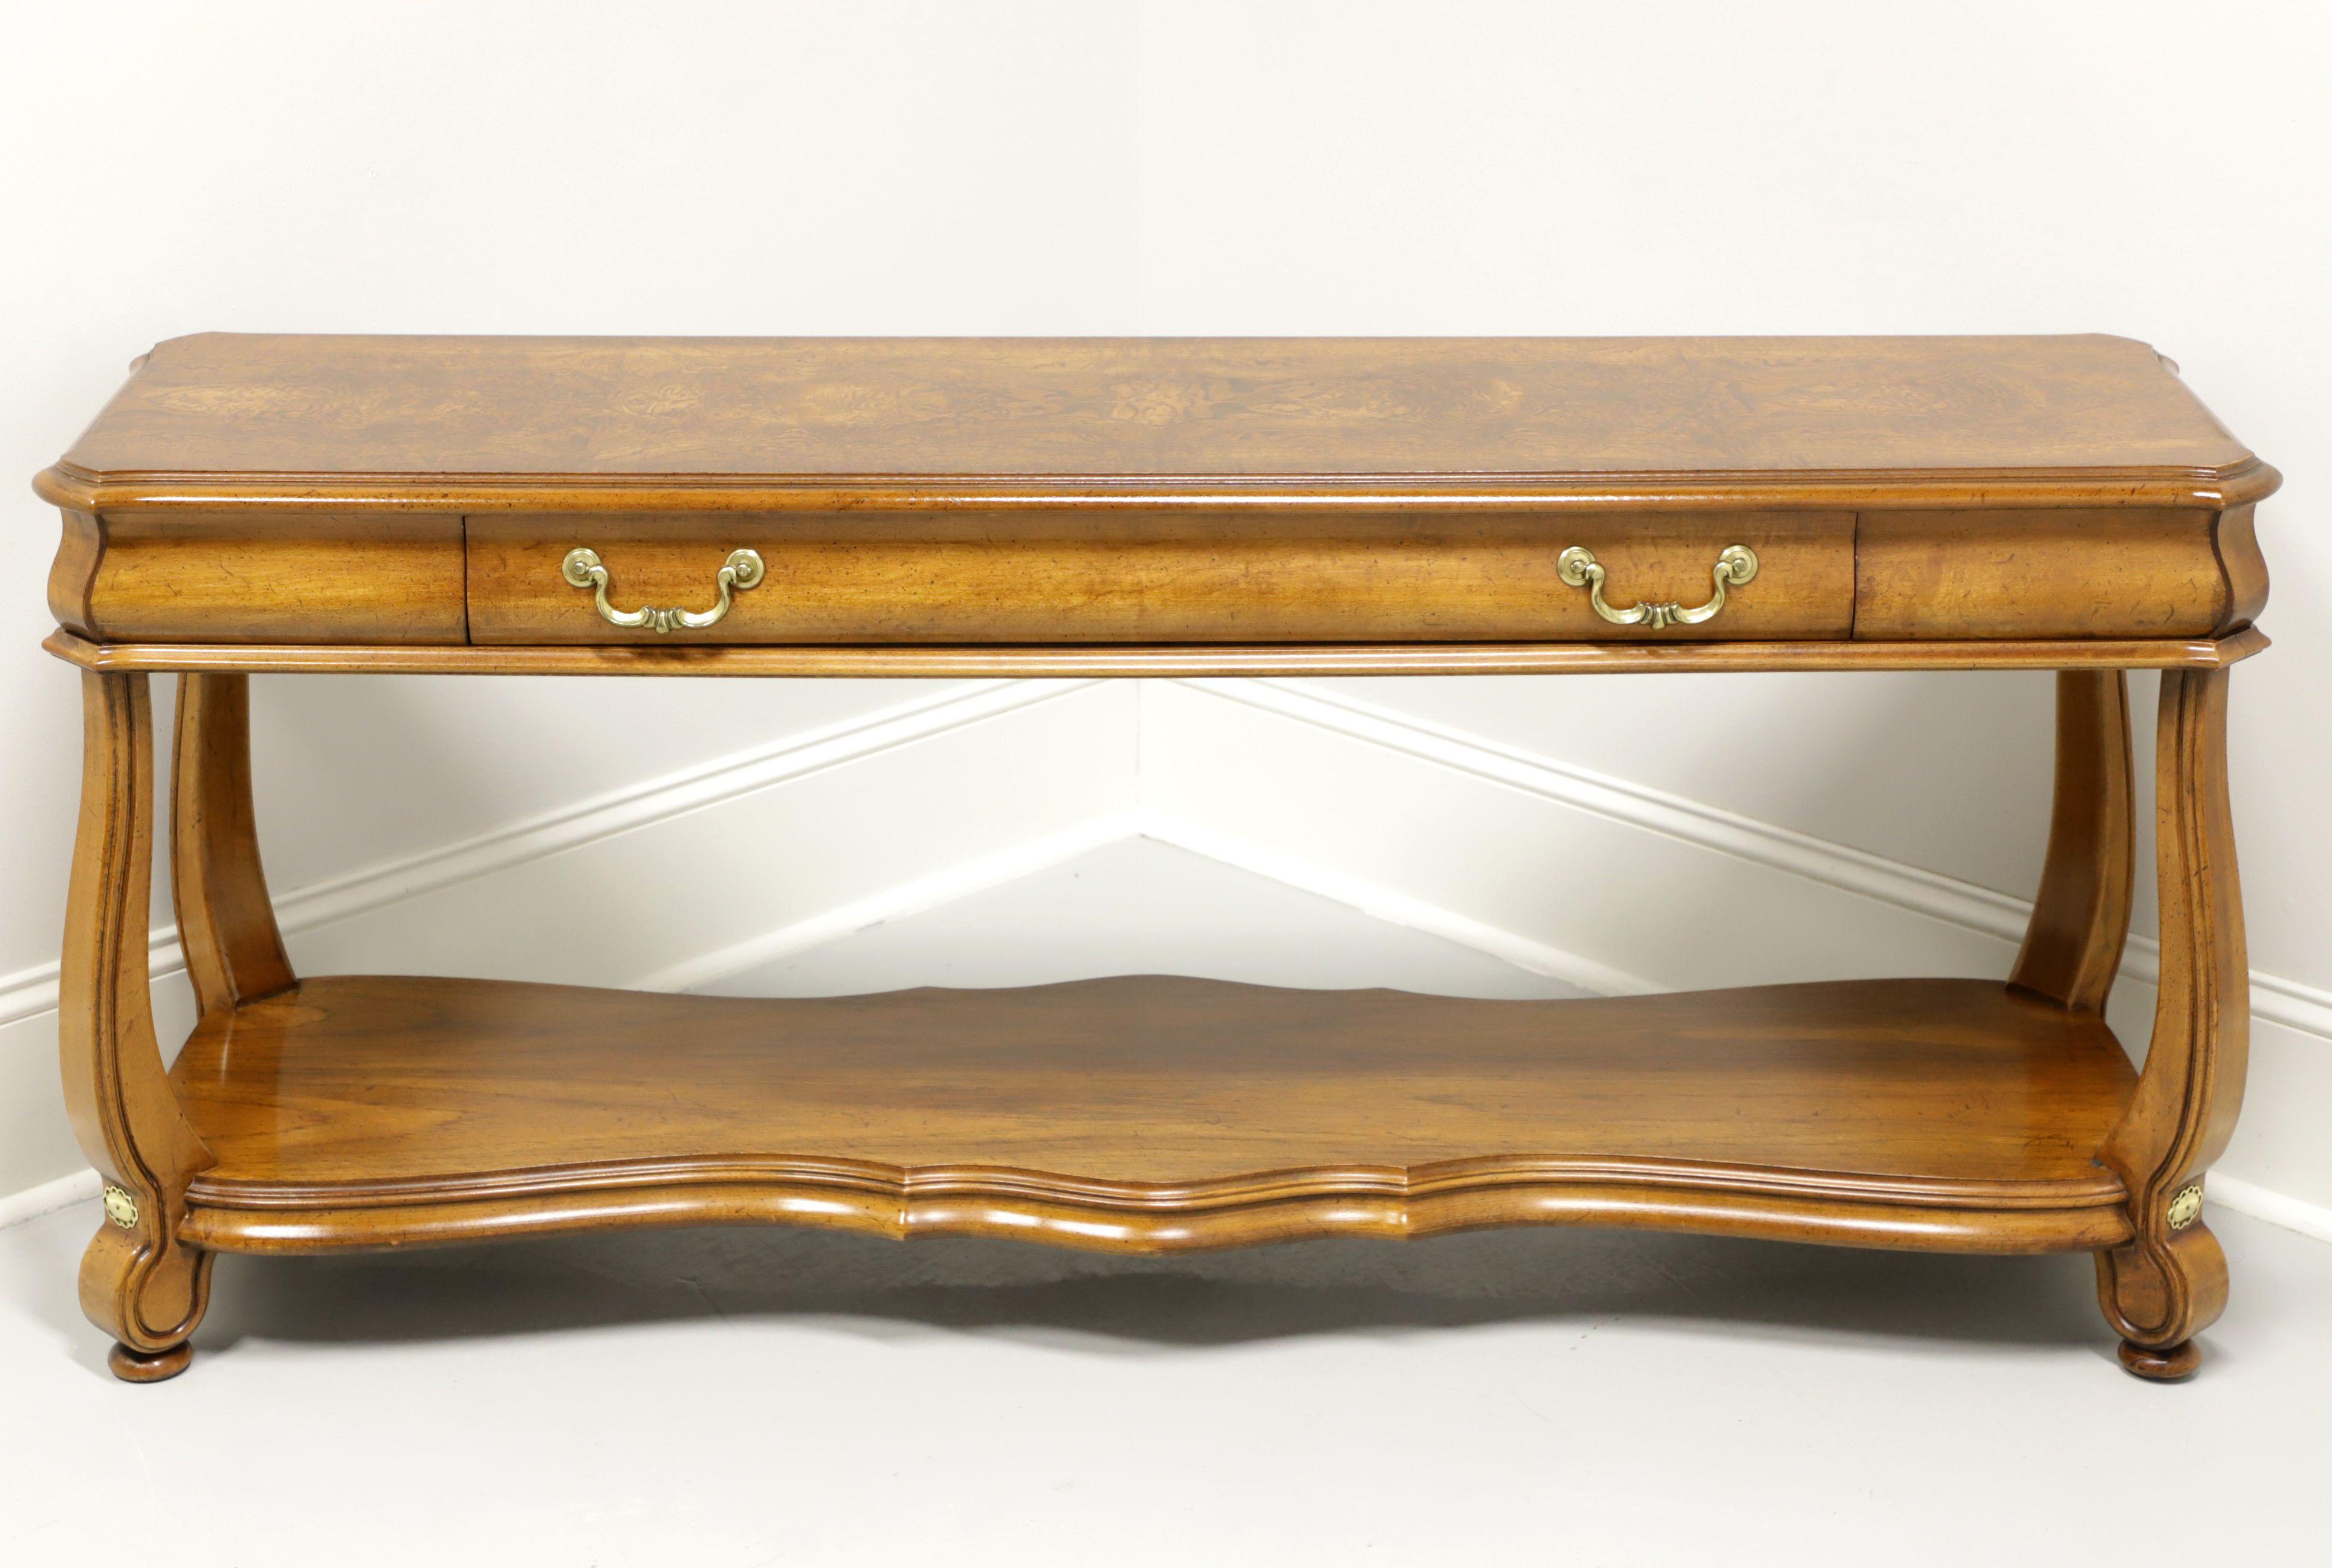 A Transitional style sofa table by Gordon's Furniture, of Johnson City, Tennessee, USA. Solid oak with burl oak top, brass accents & hardware, serpentine shaped undertier shelf, curved legs and flat bun feet. Features one drawer of dovetail